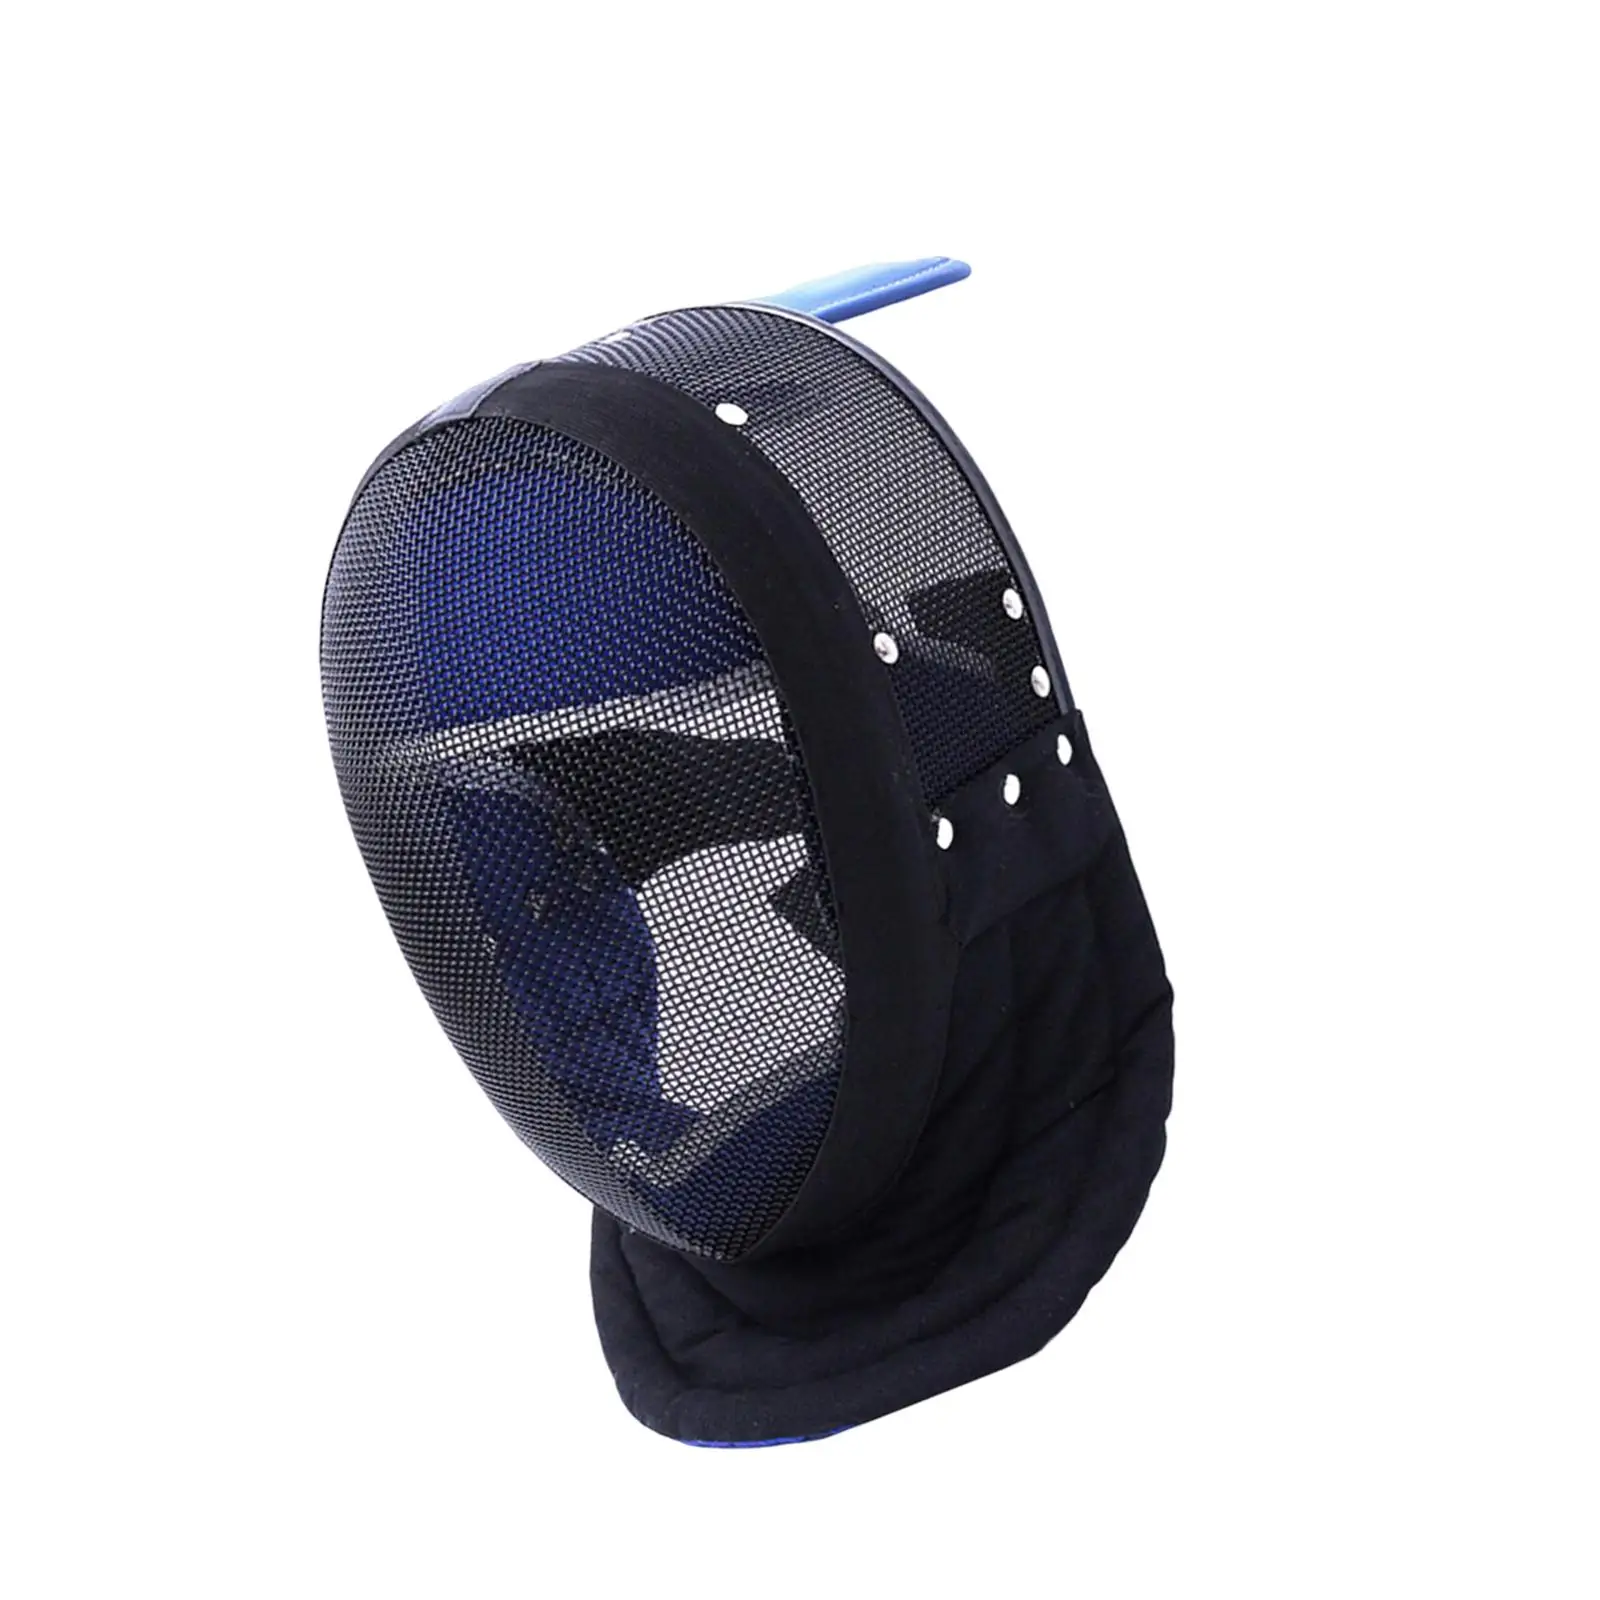 Multifunction Fencing Helmet Competition Protection Cover Durable Sports Fencing Protect for Fencing Supplies Device Training